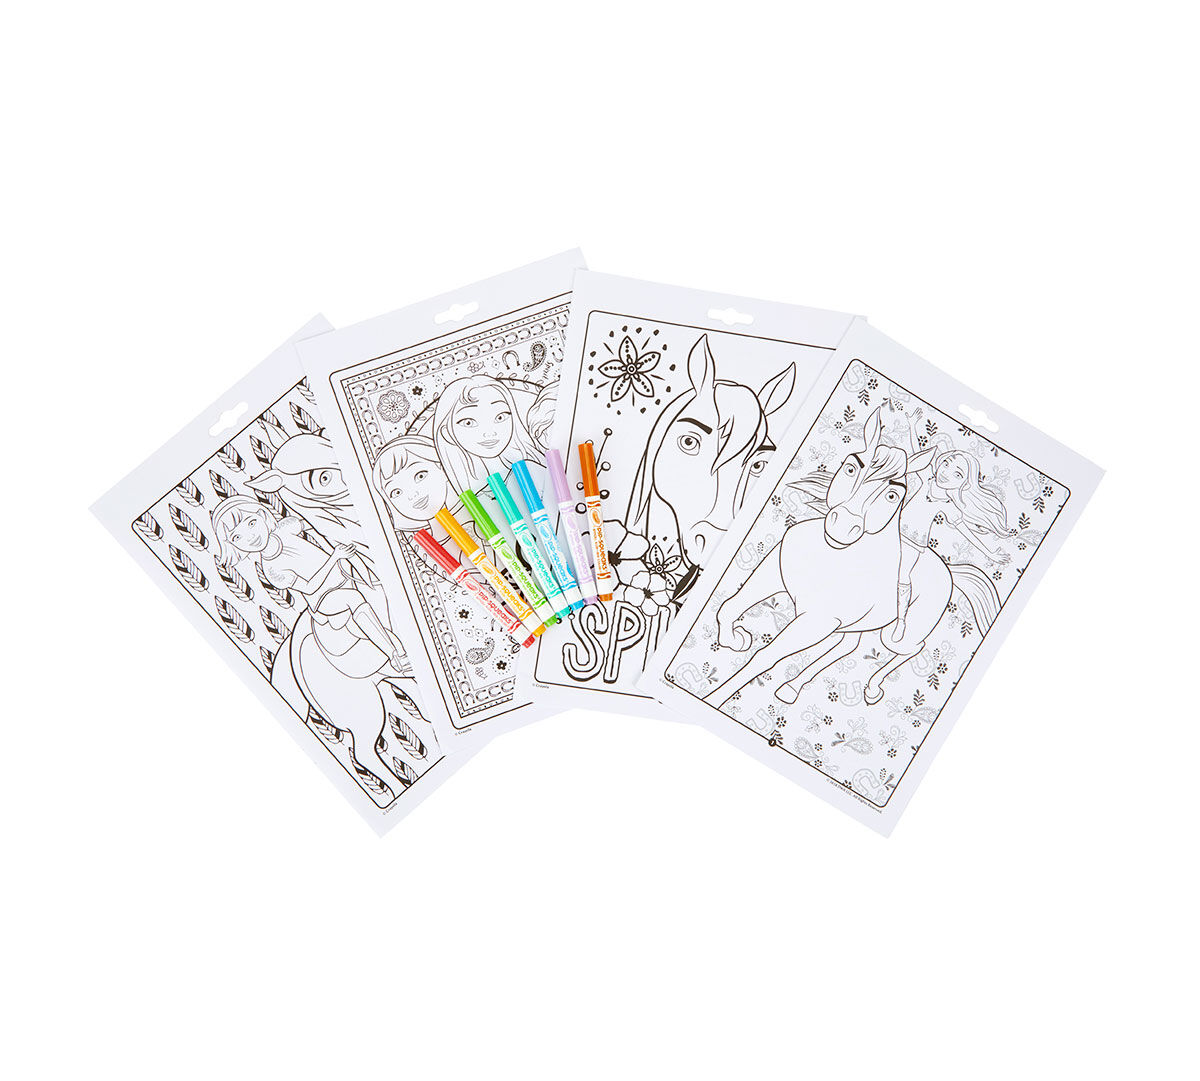 Mess-Free Party Supplies Dreamworks Spirit Coloring Book Bundle ~ Spirit Imagine Ink Mess-Free Coloring Book with Magic Pen and Horse Stickers 